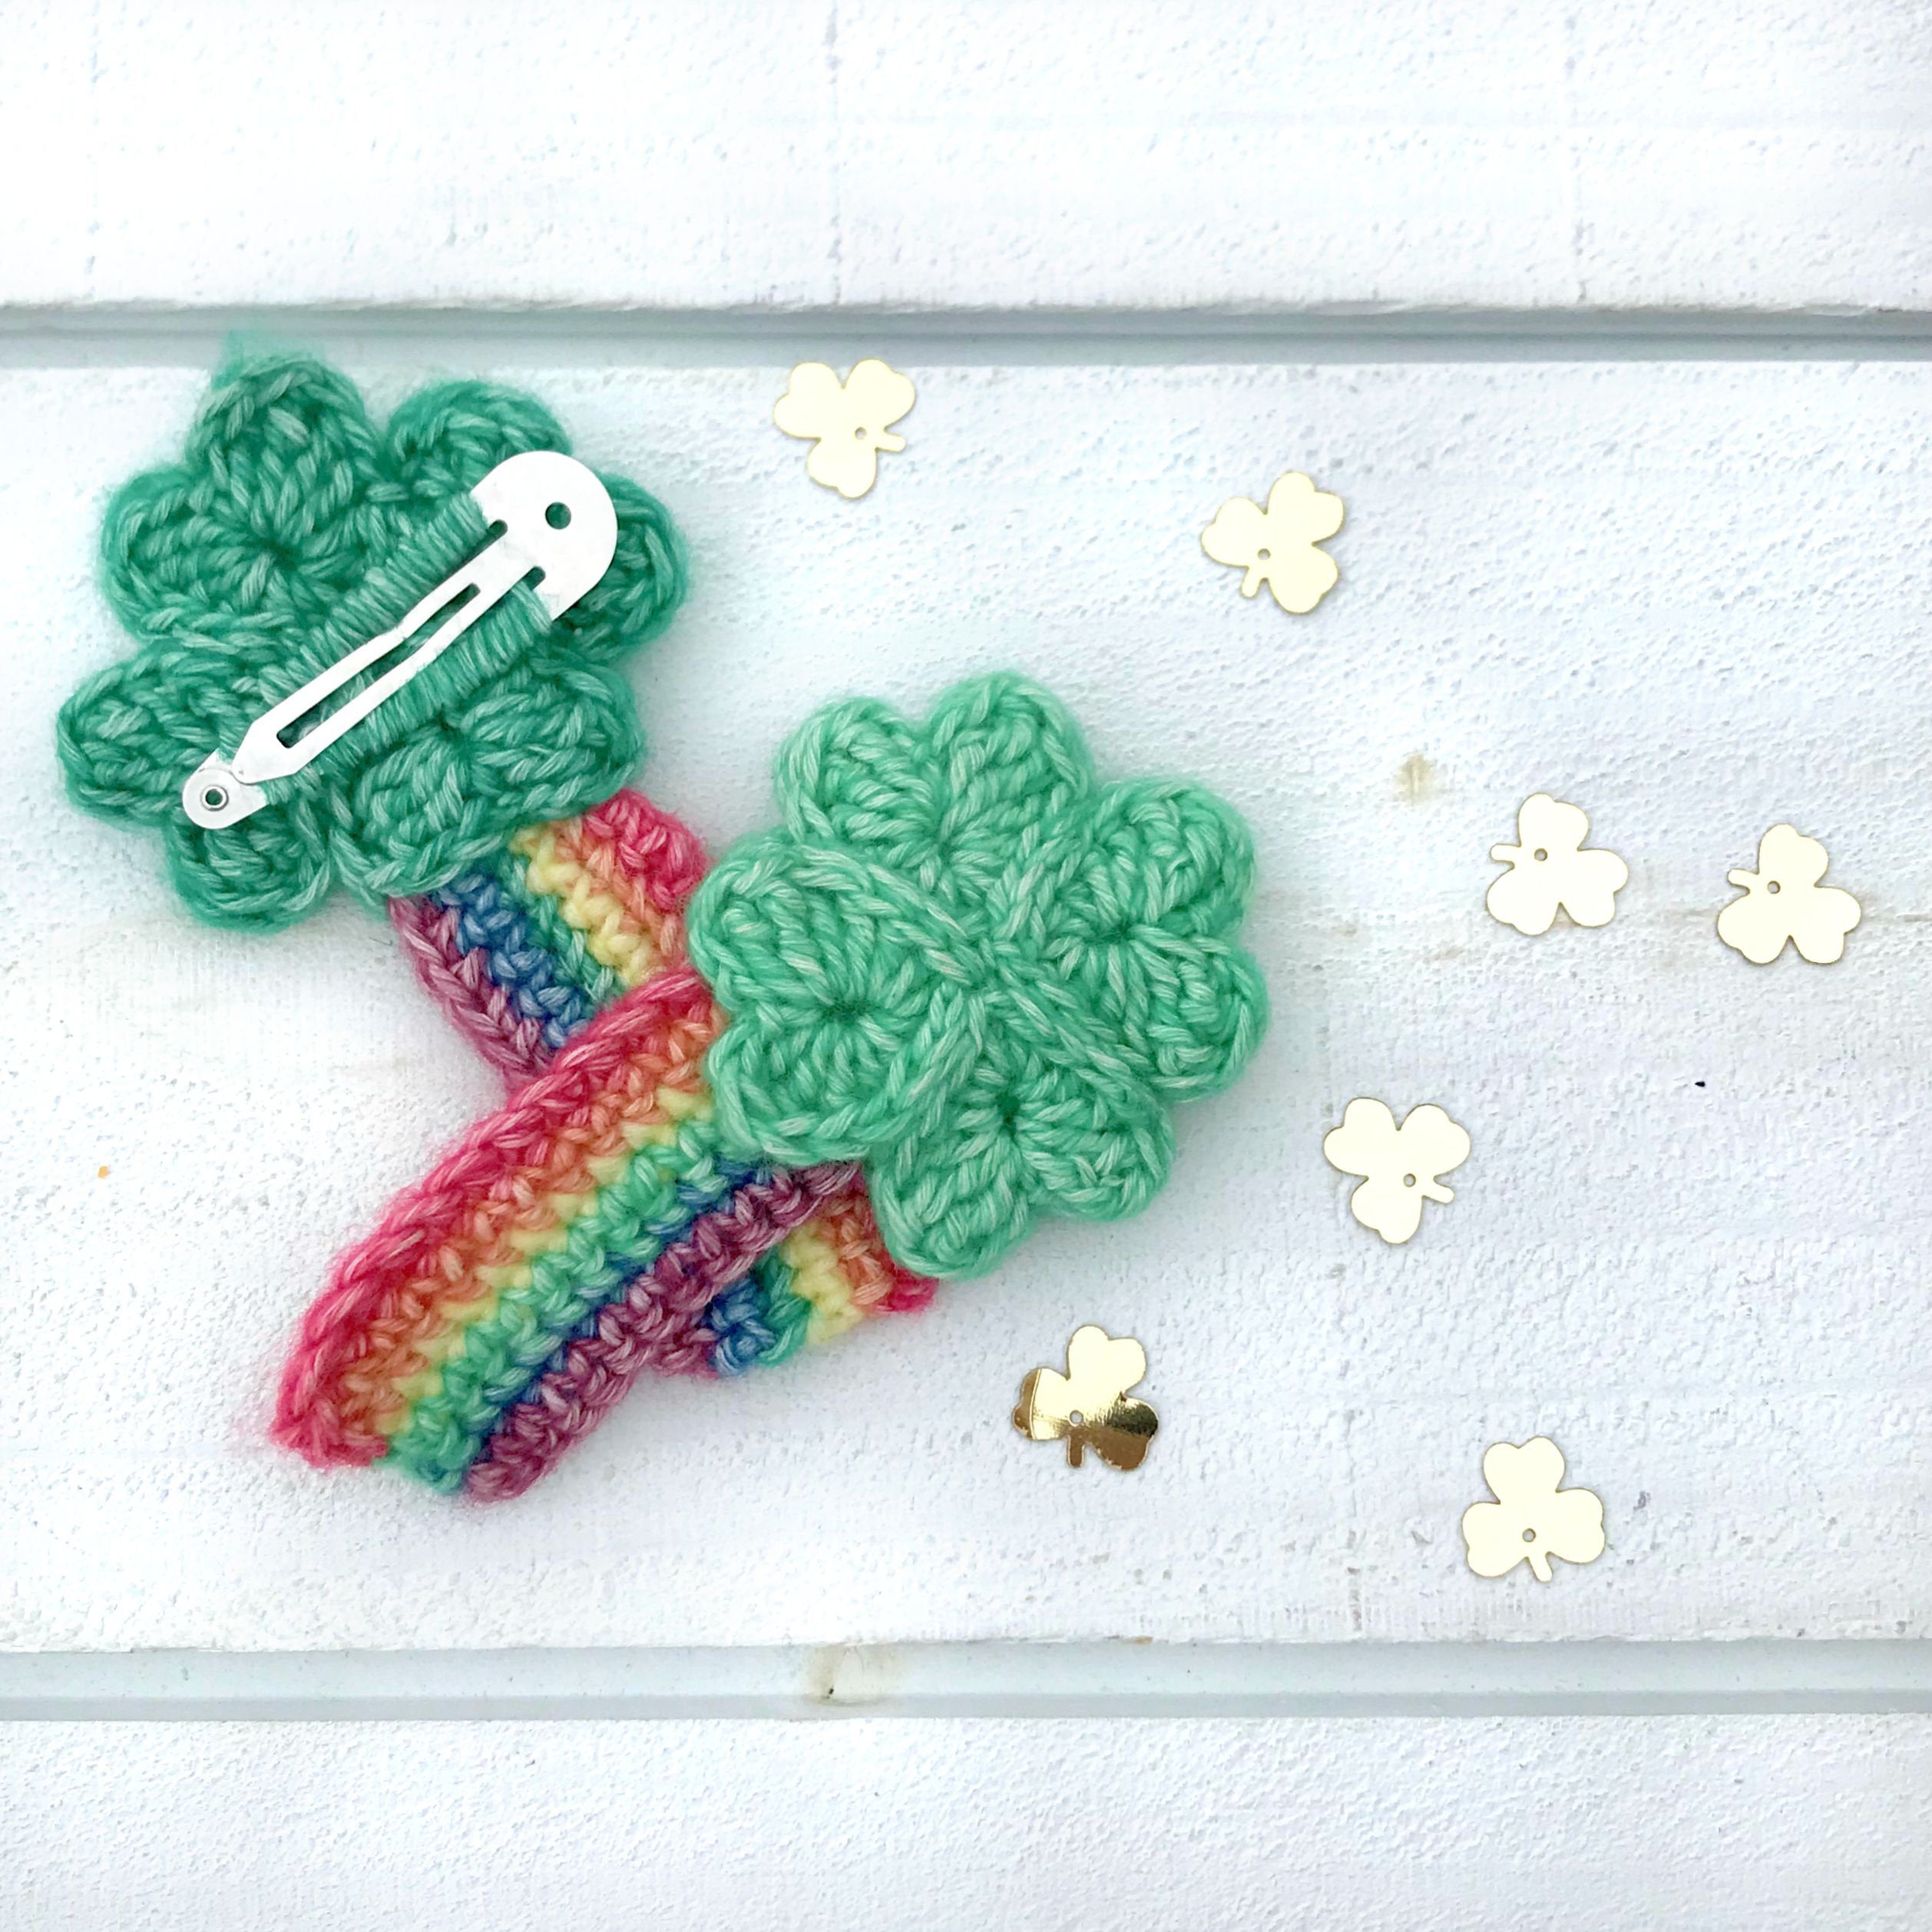 Crochet a Shamrock Hair Clip ... It's Adorable and Way Better Than a Shake!